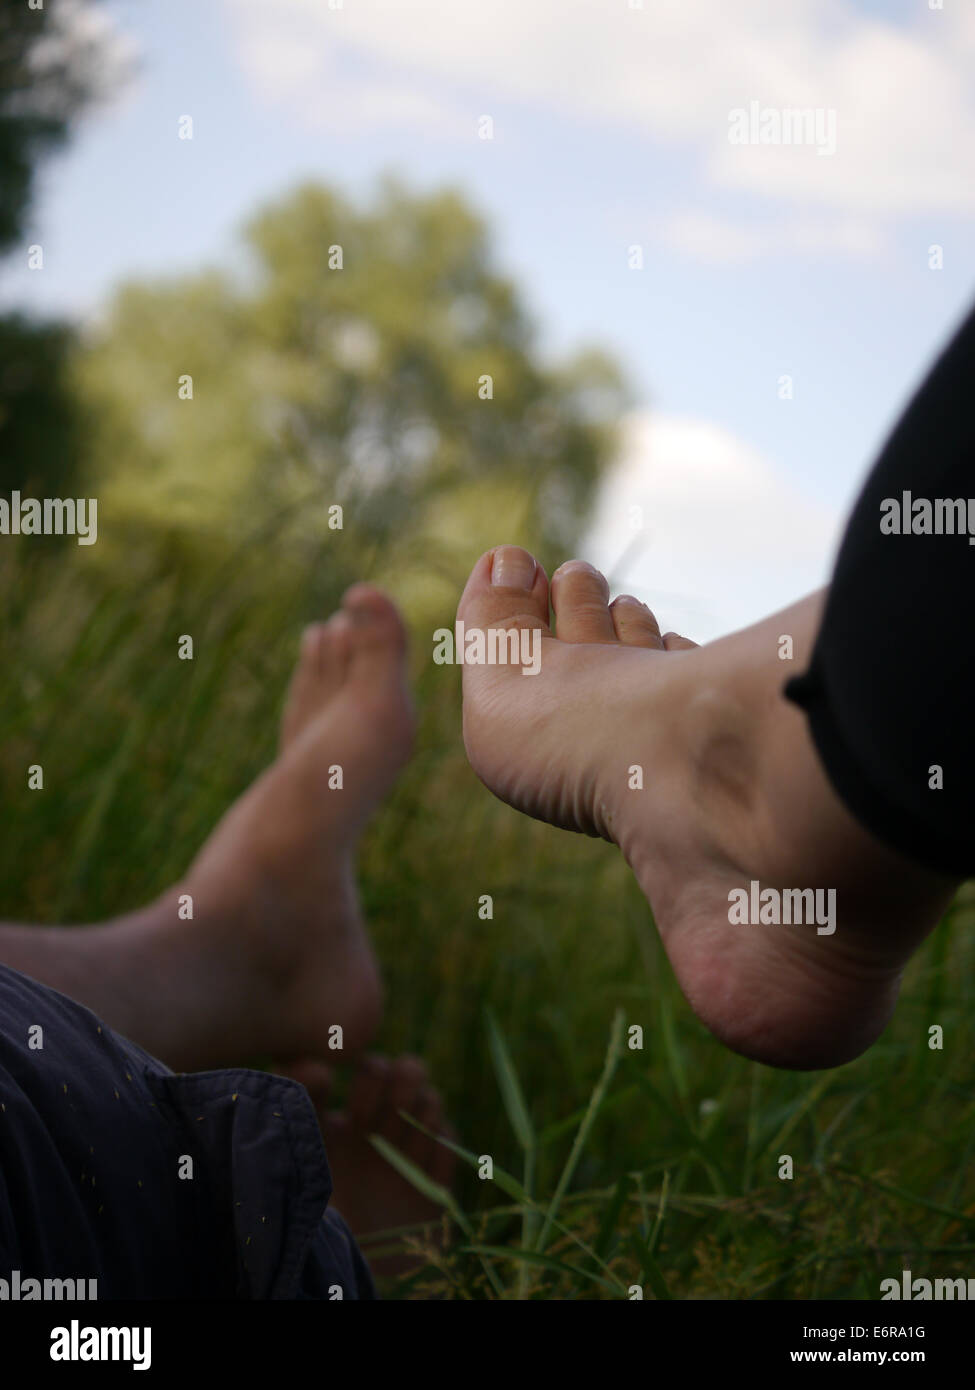 Two people's feet, taken lying in the grass on a Summer day Stock Photo